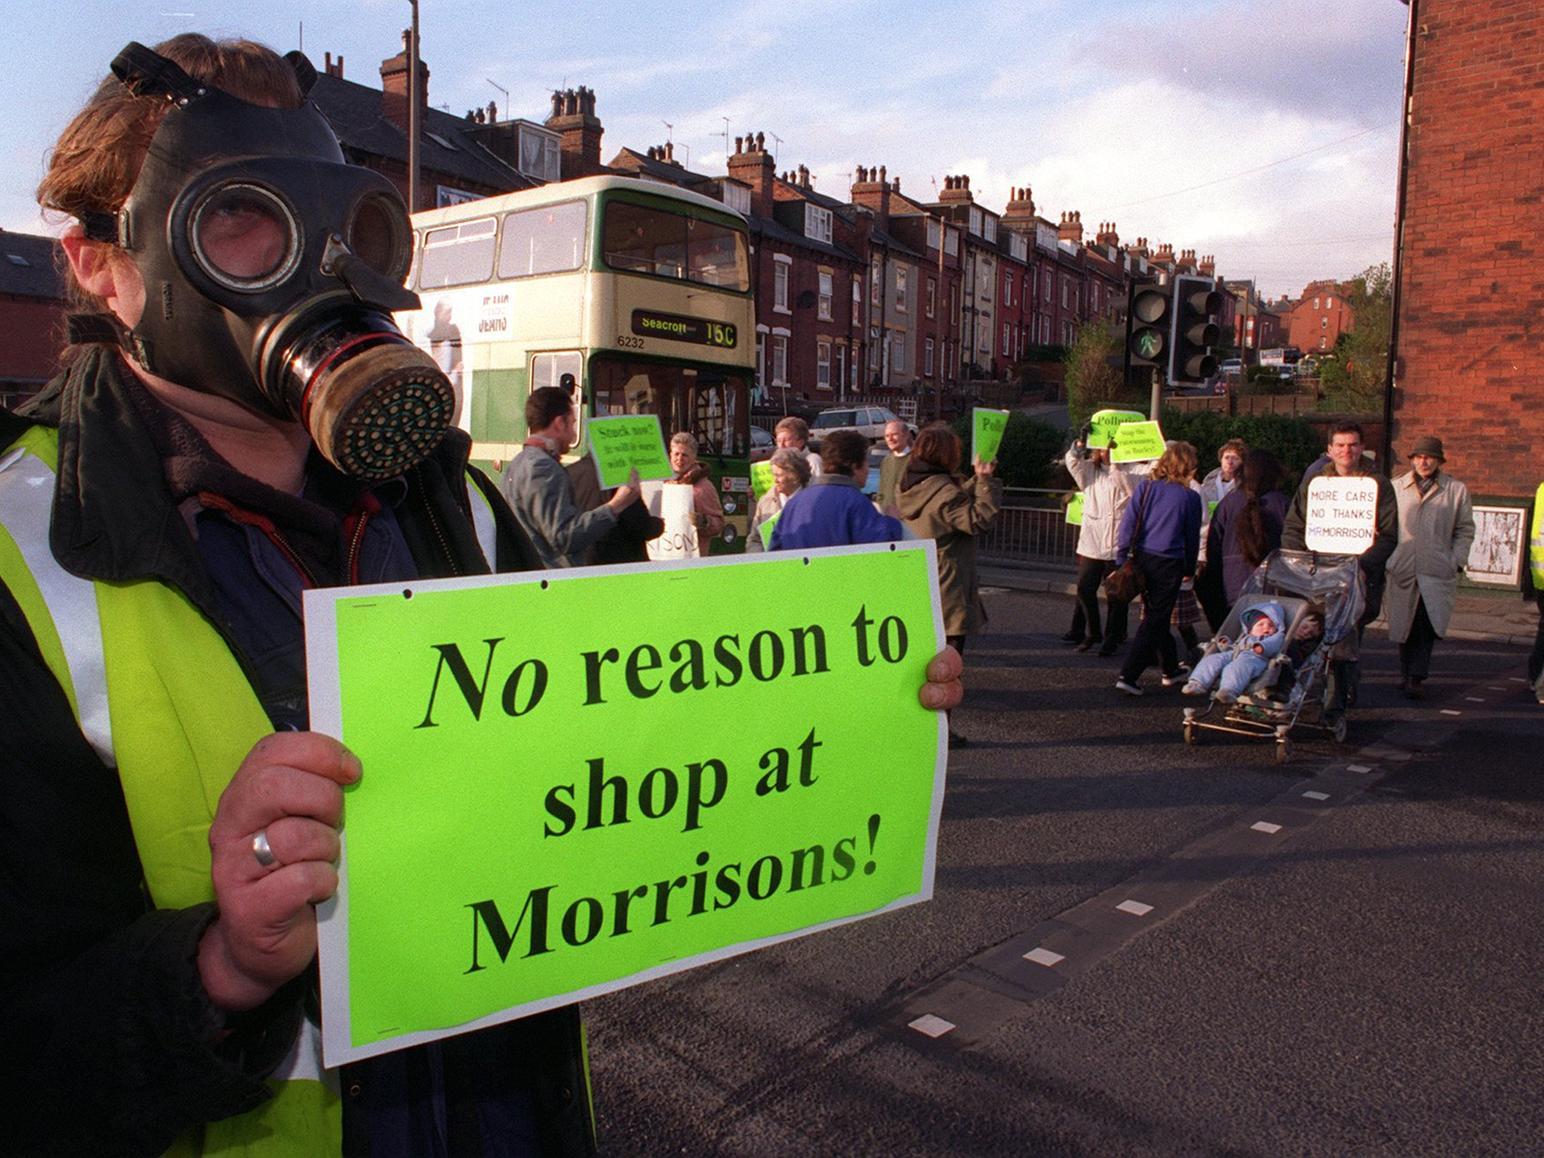 March 1997 and members of the Kirkstall Valley Campaign opposed to the building of a Morrison's supermarket took their protest to the streets.